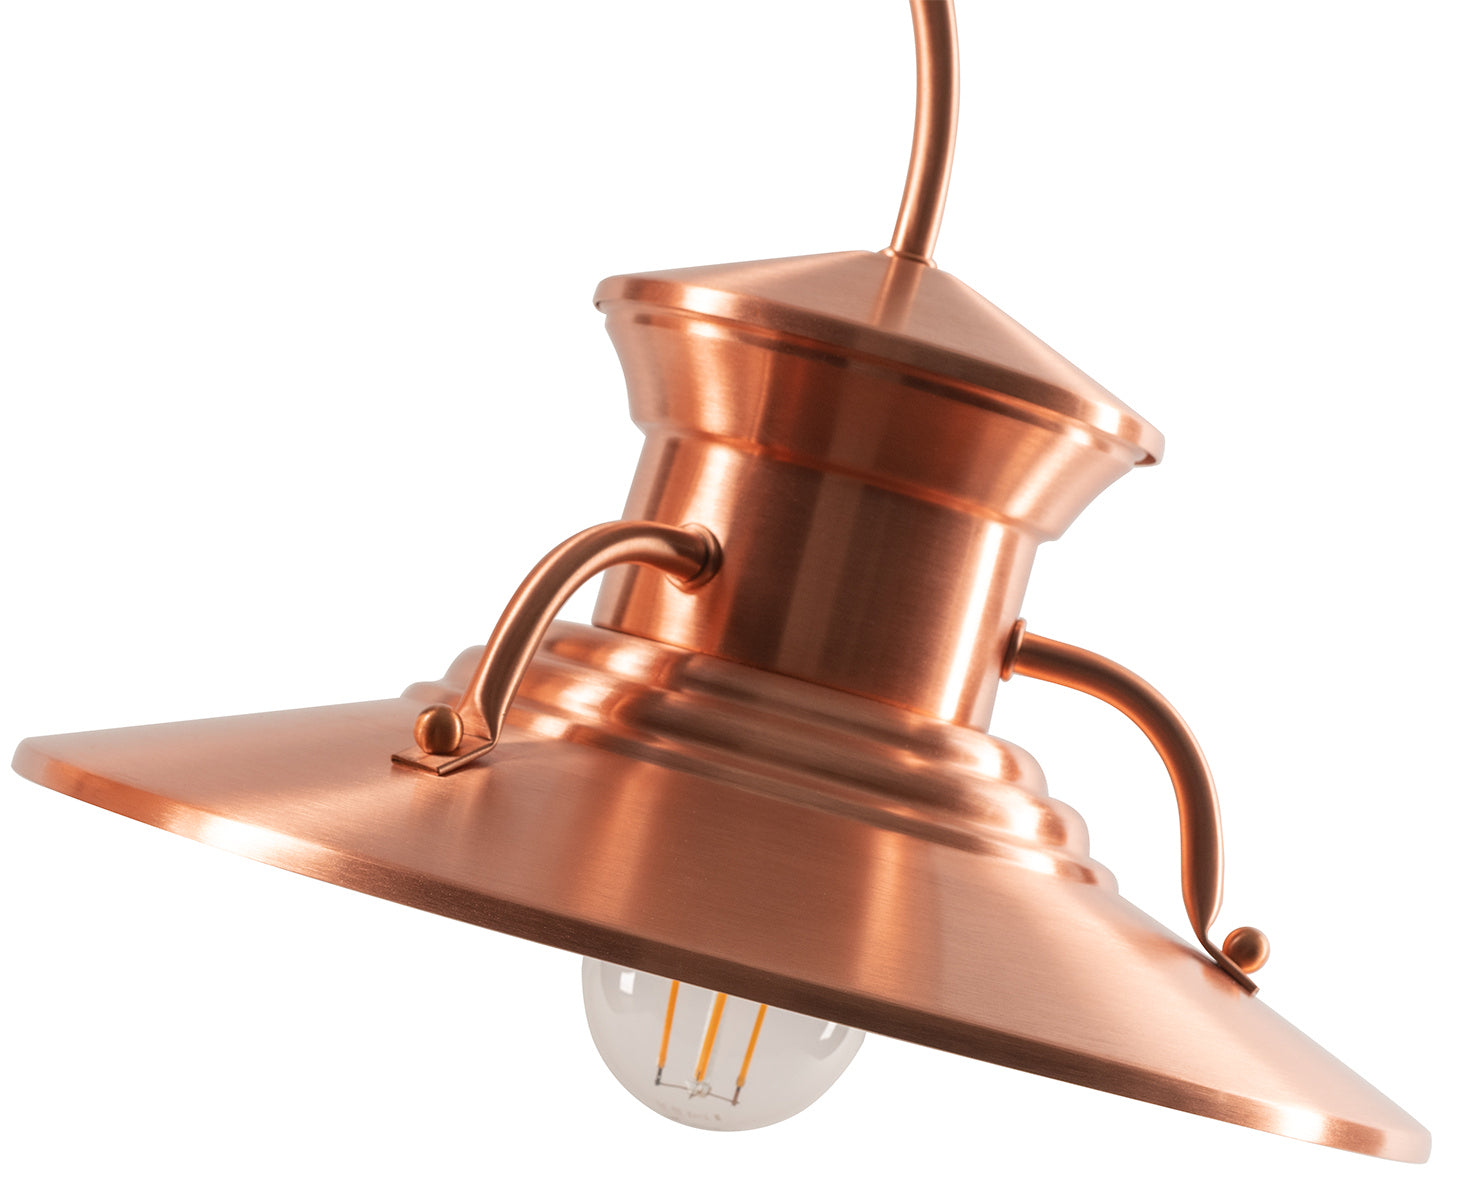 Norwell Lighting 5155-CO-NG Budapest One Light Wall Mount Outdoor Copper/Antique/Verde